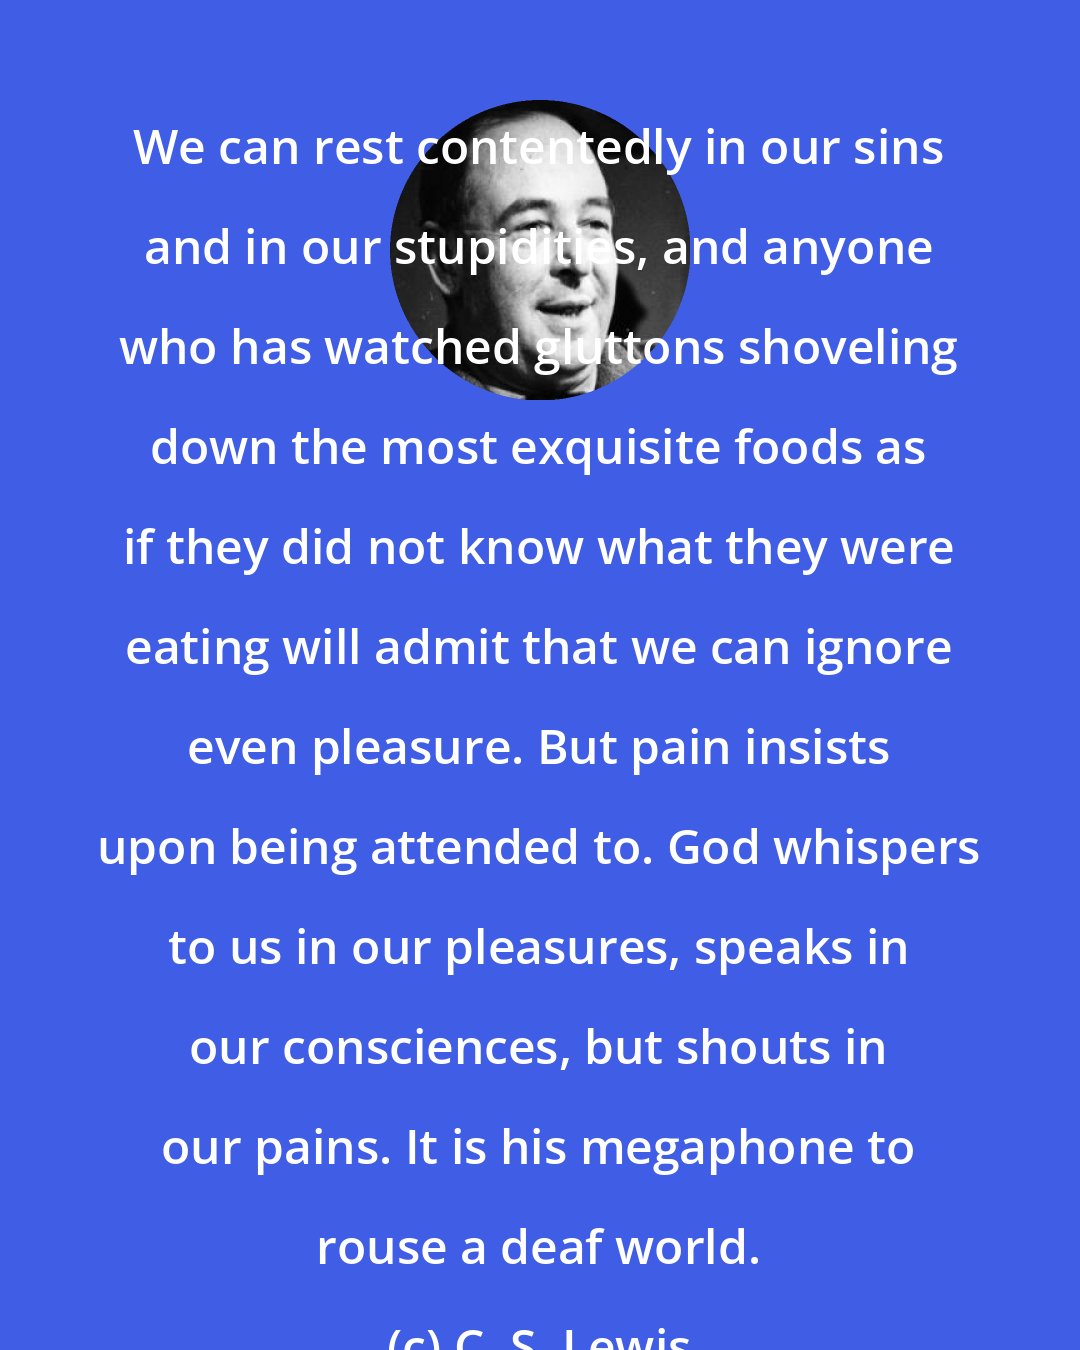 C. S. Lewis: We can rest contentedly in our sins and in our stupidities, and anyone who has watched gluttons shoveling down the most exquisite foods as if they did not know what they were eating will admit that we can ignore even pleasure. But pain insists upon being attended to. God whispers to us in our pleasures, speaks in our consciences, but shouts in our pains. It is his megaphone to rouse a deaf world.